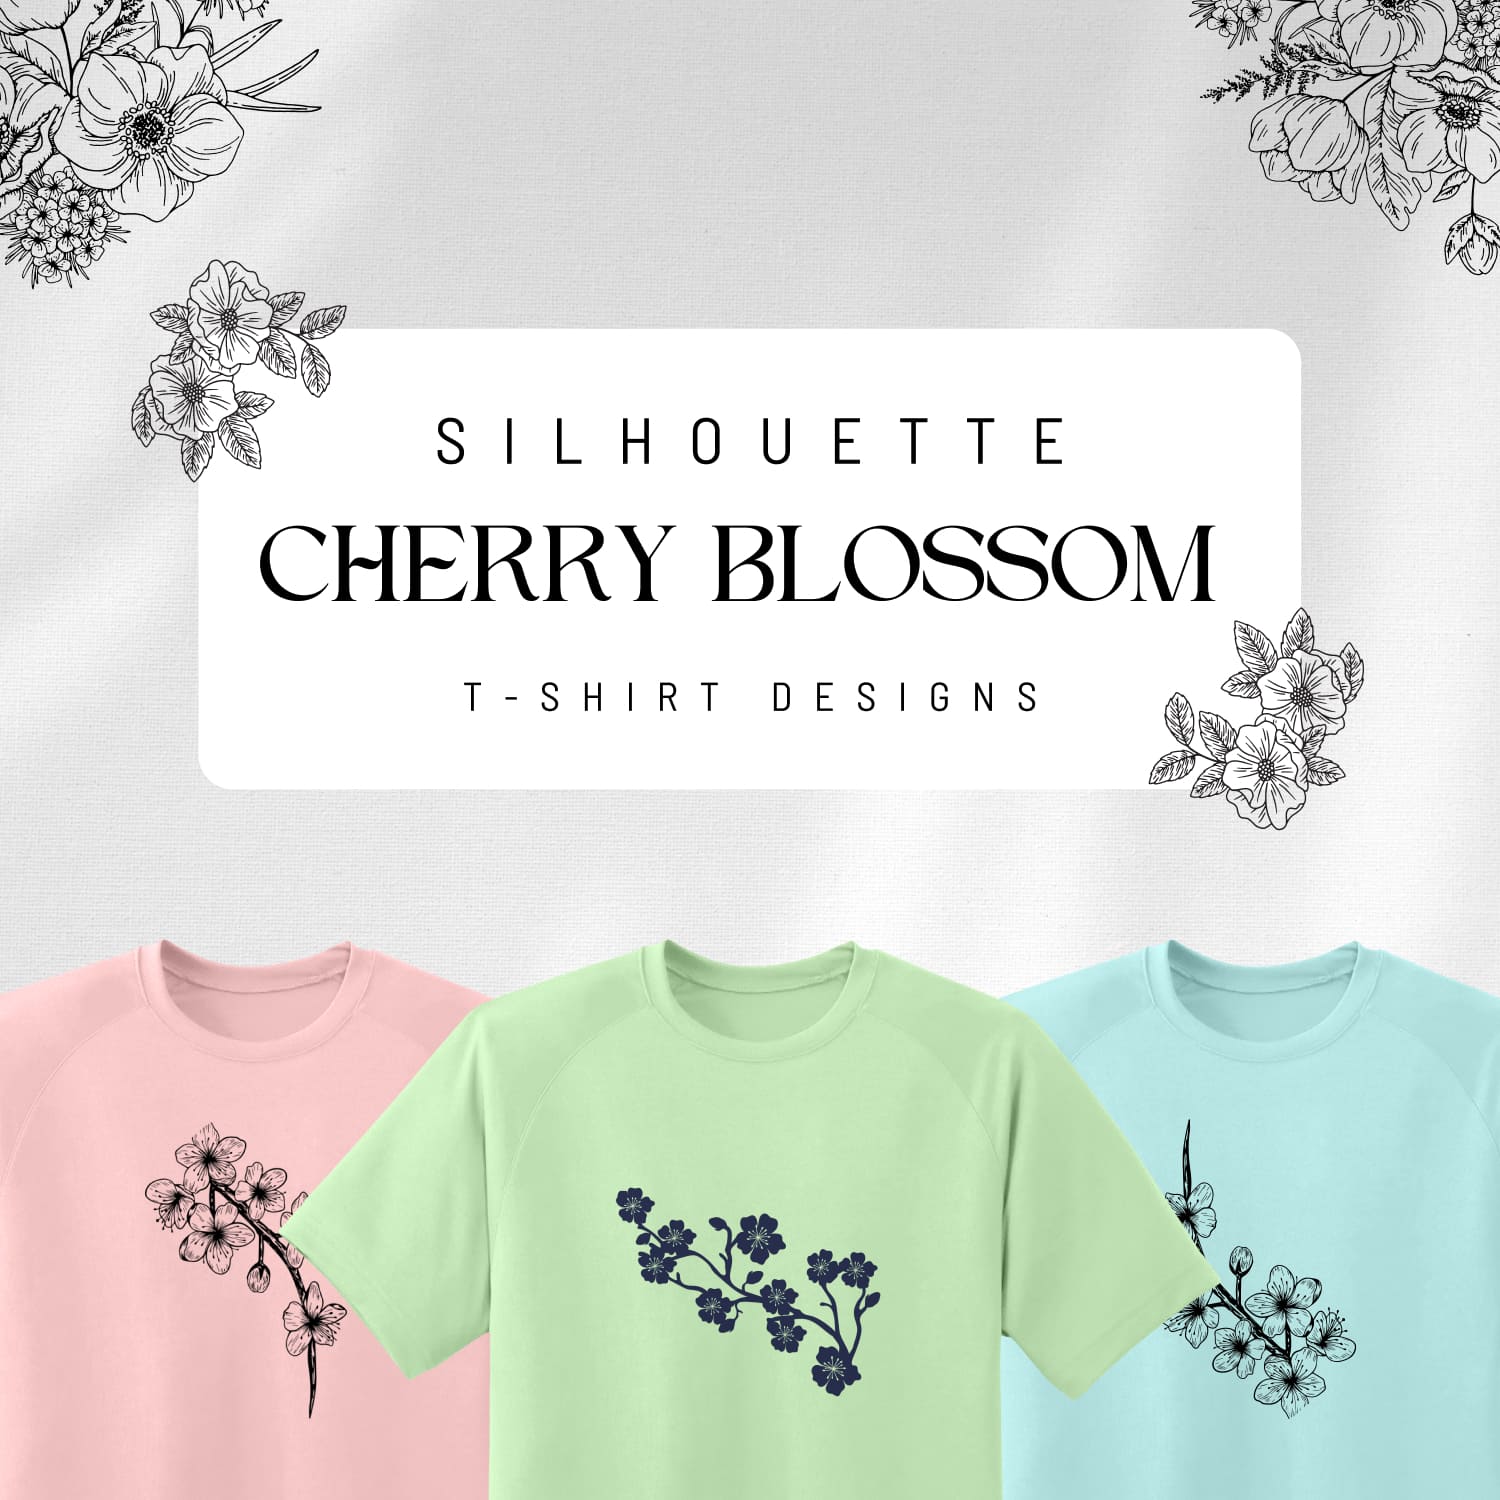 Images with silhouette cherry blossom t shirt designs.